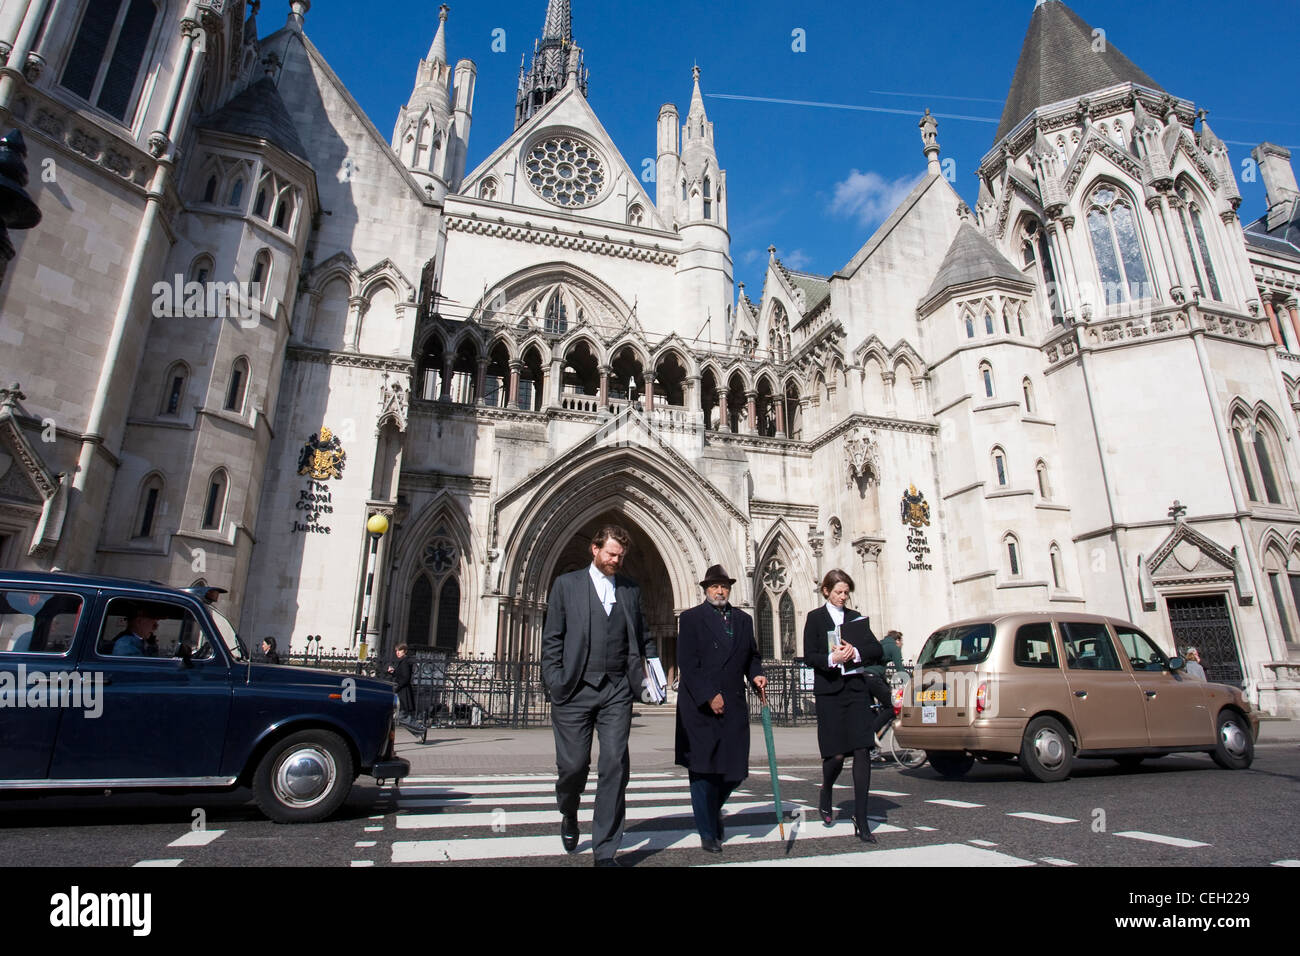 High Court, The Royal Courts of Justice, London, England, UK. Stock Photo